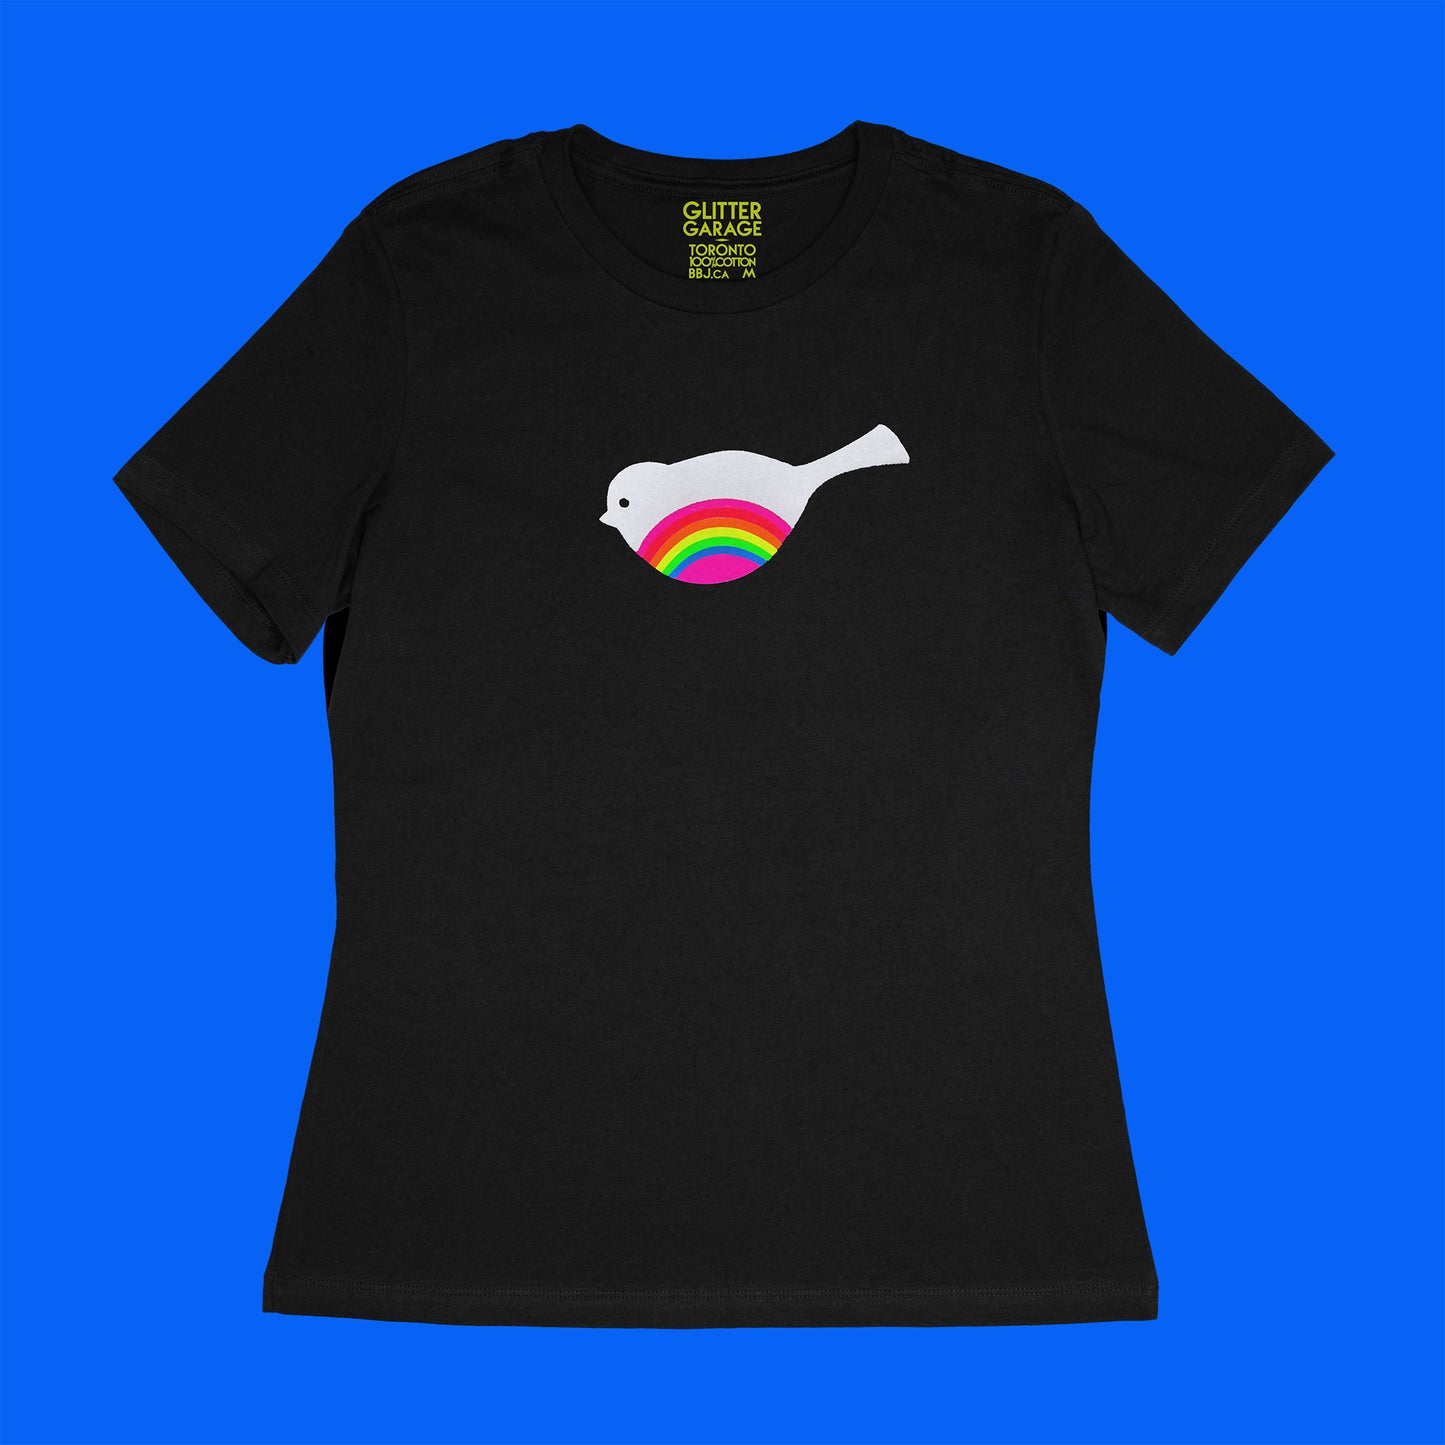 fuzzy white bird with neon rainbow striped belly on black women's relaxed fit tee by BBJ / Glitter Garage